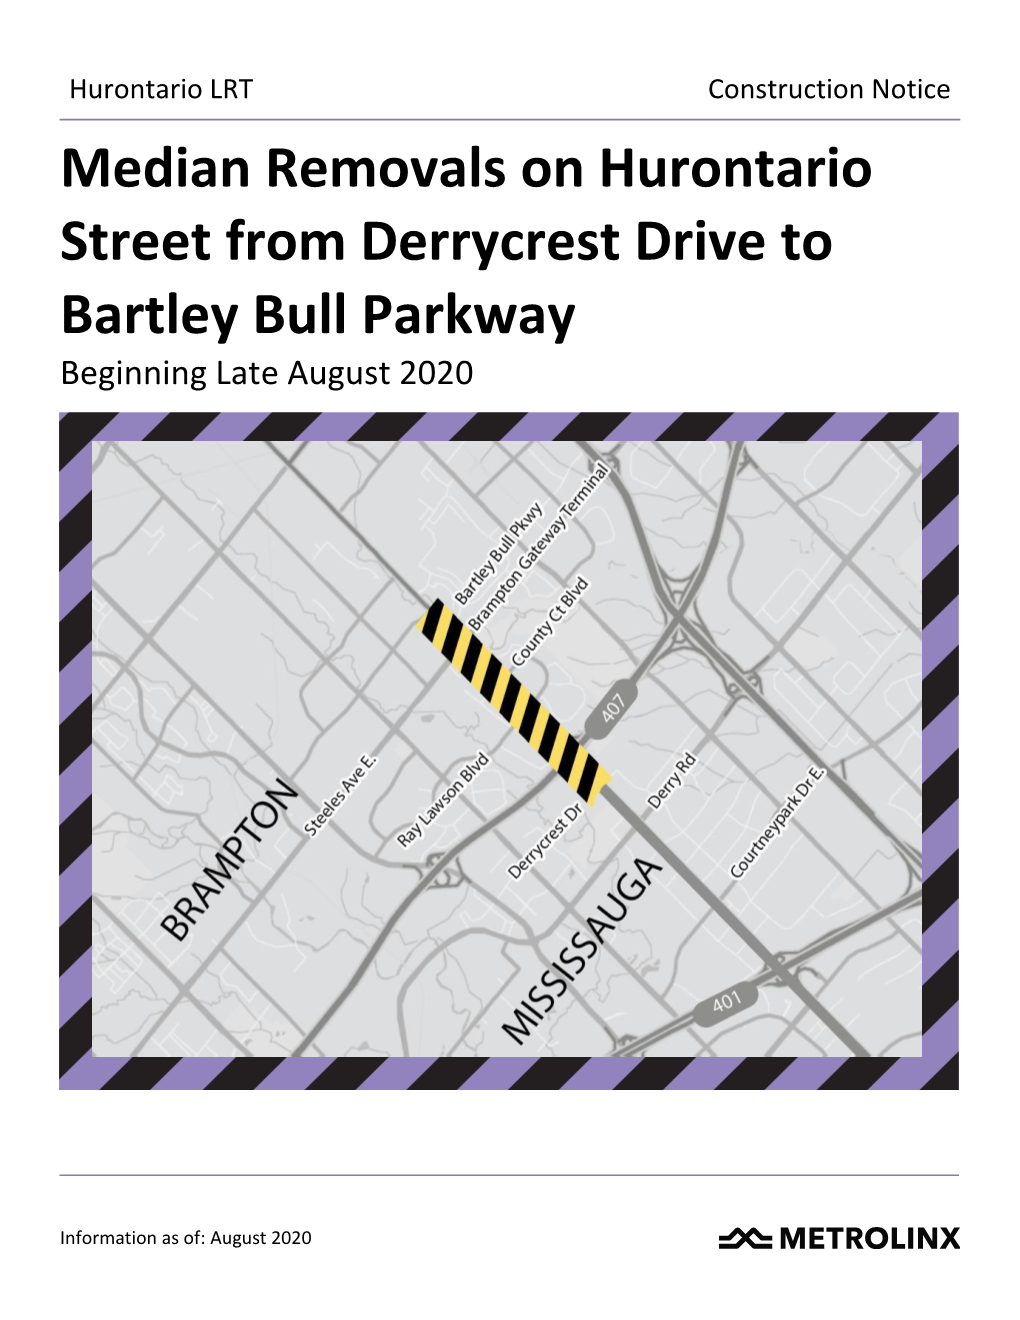 Median Removals on Hurontario Street from Derrycrest Drive to Bartley Bull Parkway Beginning Late August 2020